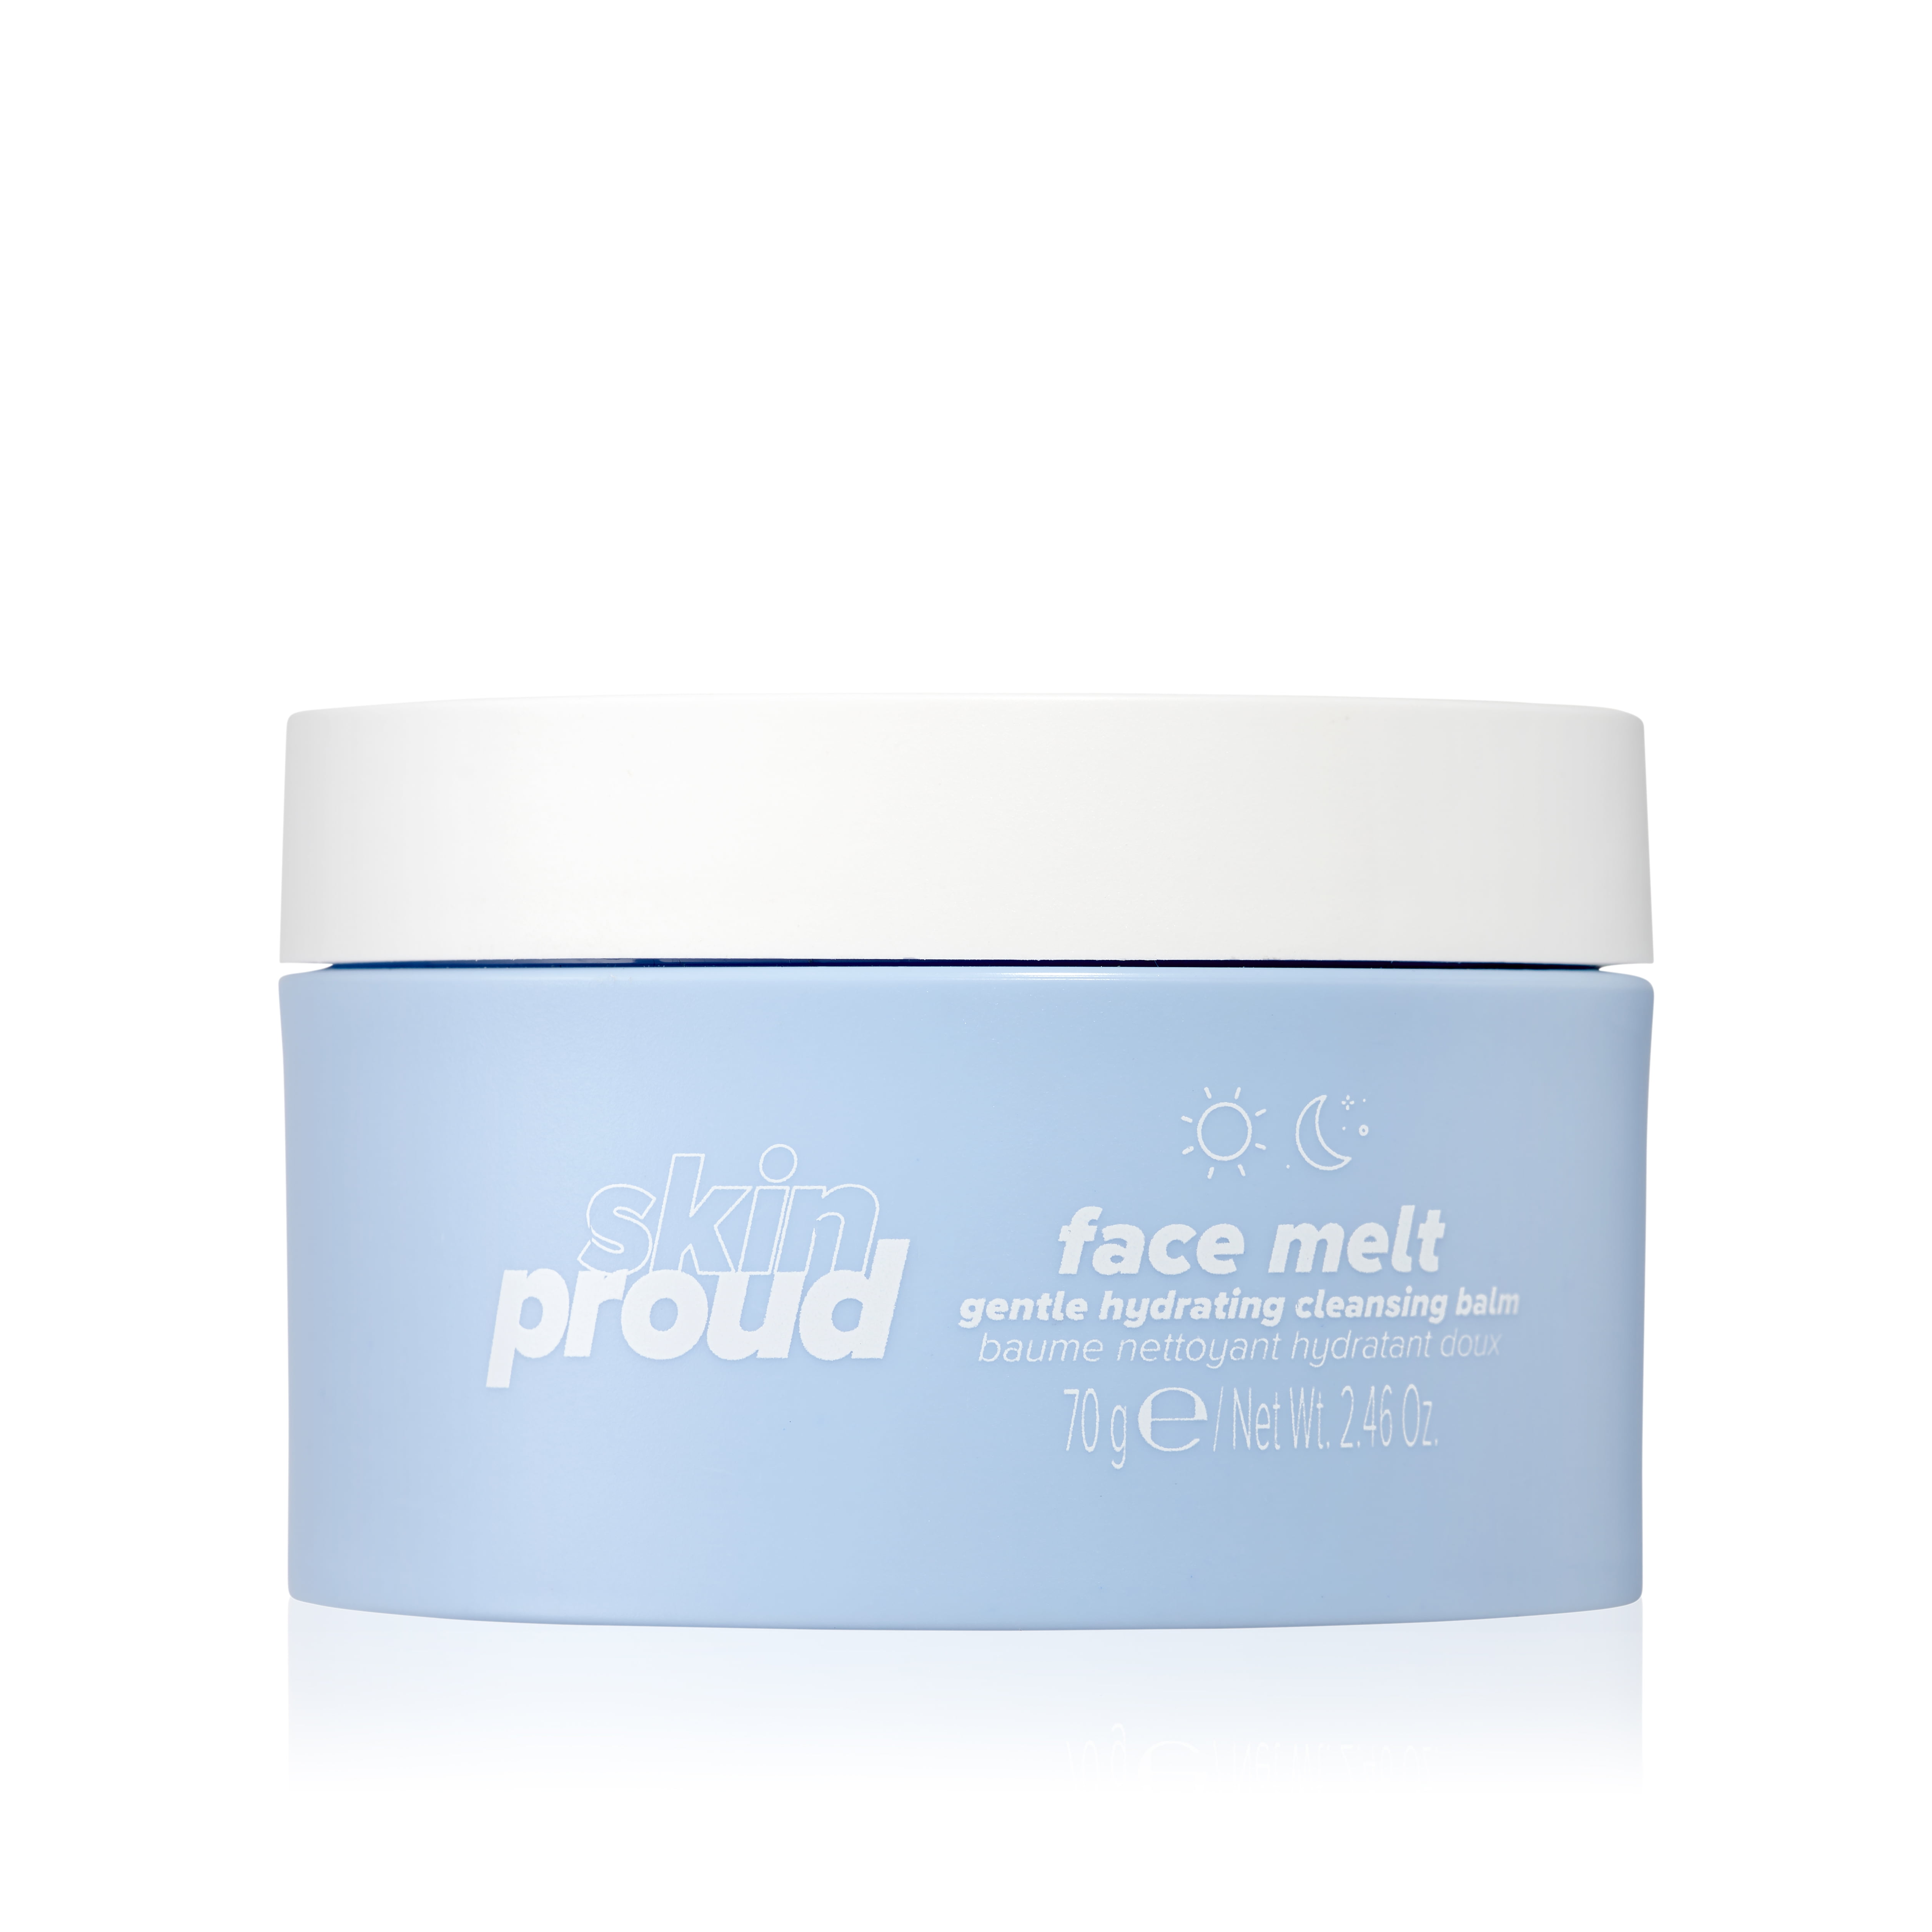 Skin Proud Face Melt, Gentle Hydrating Cleansing Balm